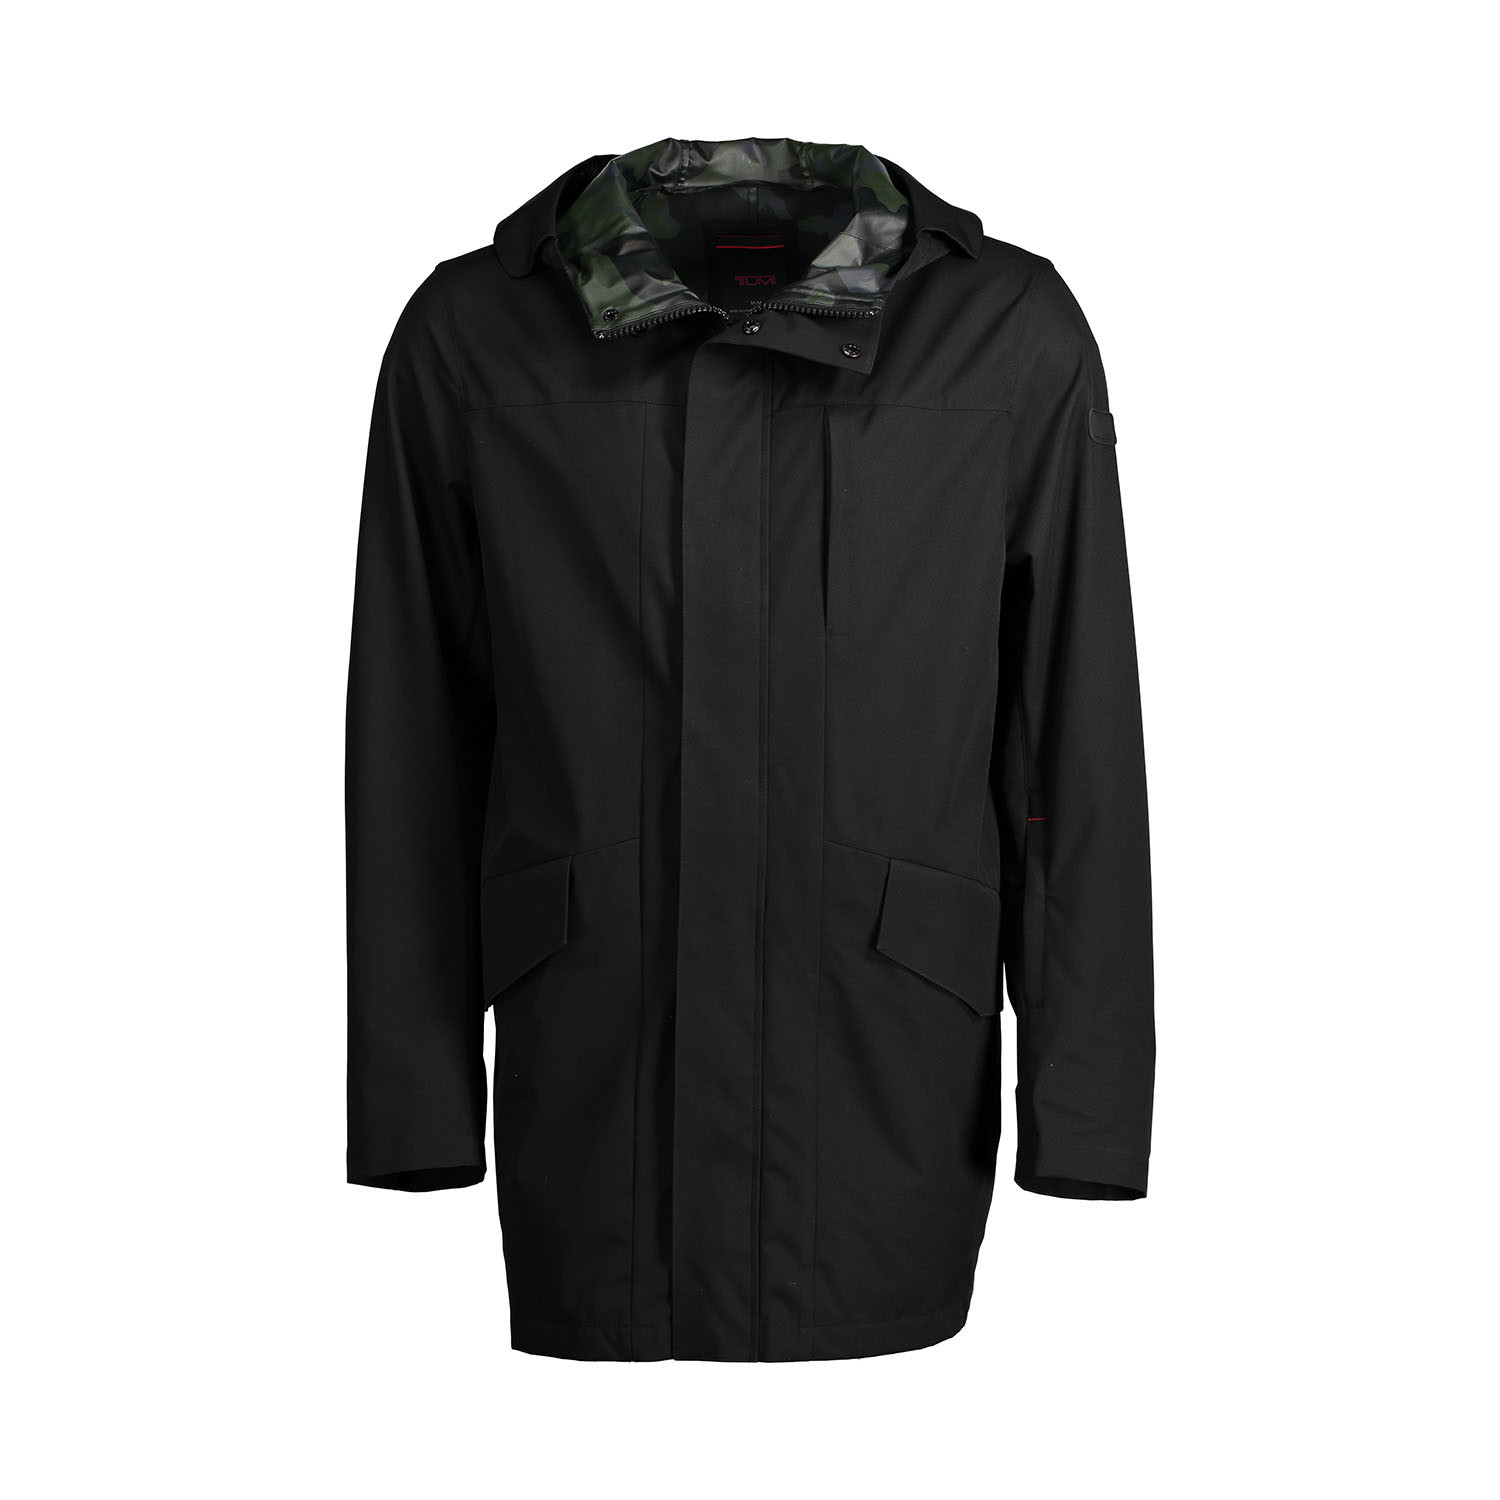 Raincoat // Black + Camo (XL) - The Very Warm - Touch of Modern